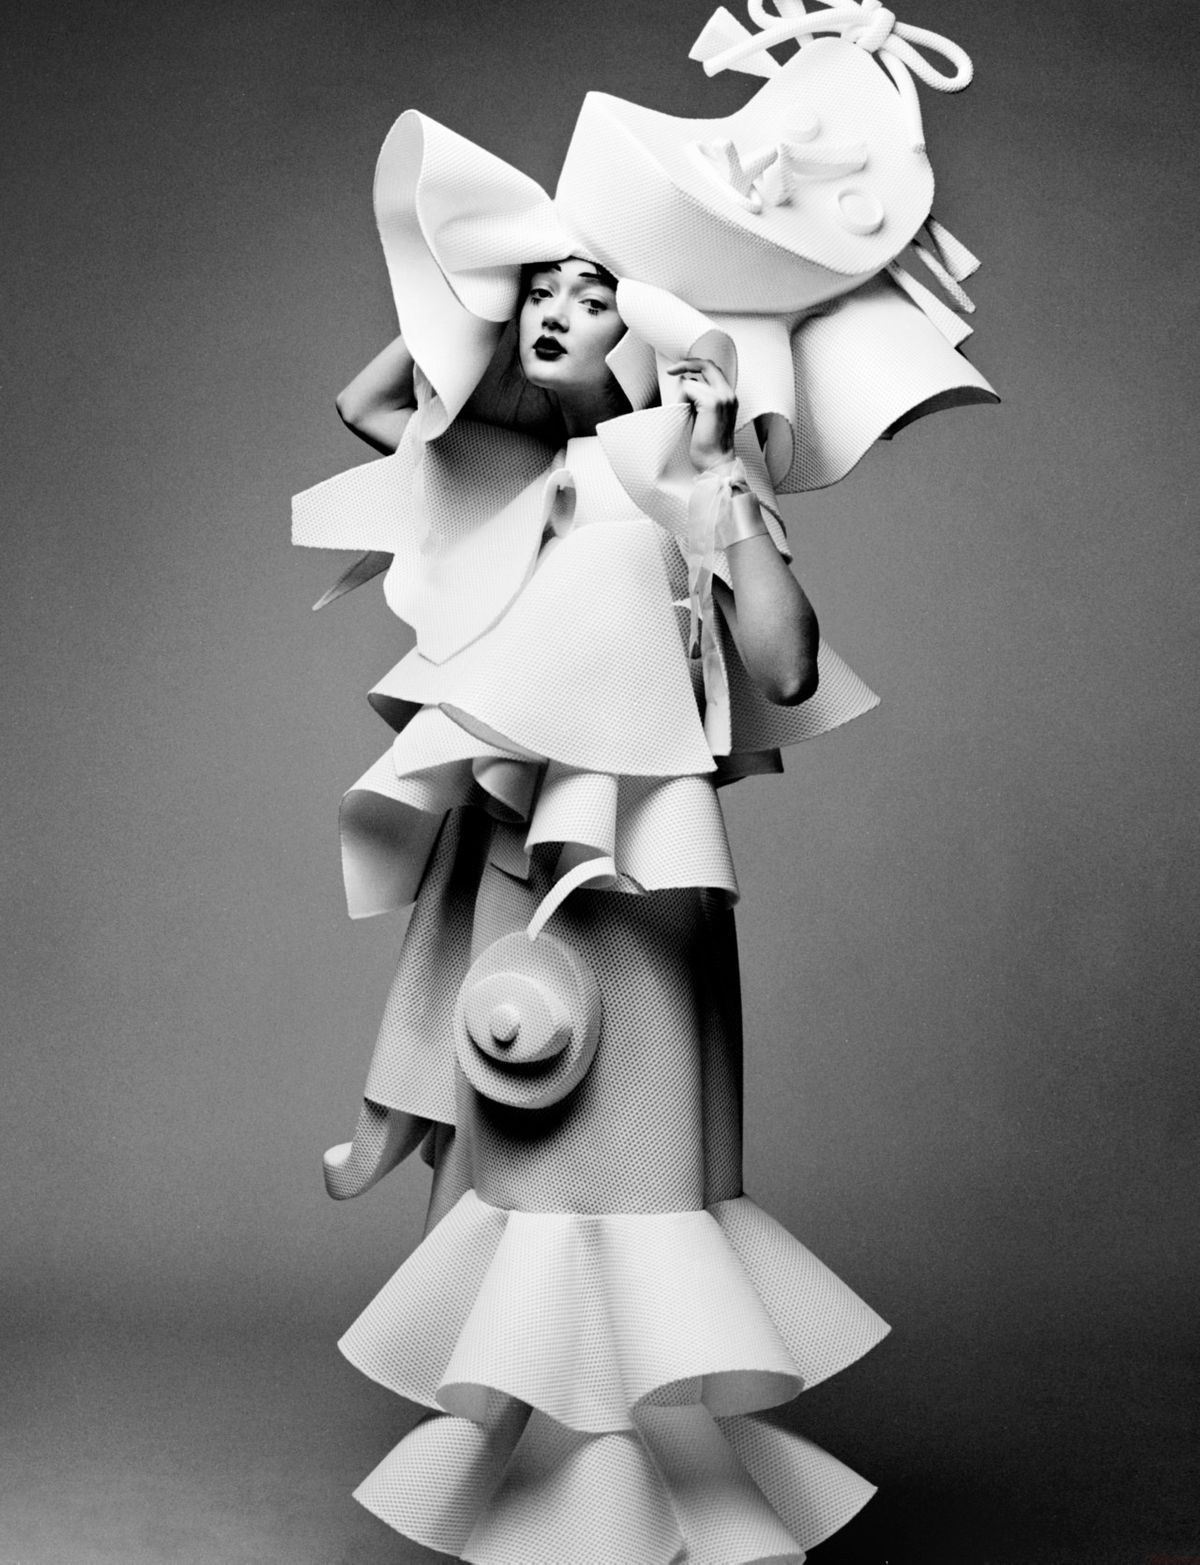 Win tickets to see Viktor and Rolf: Fashion Artists at the National ...